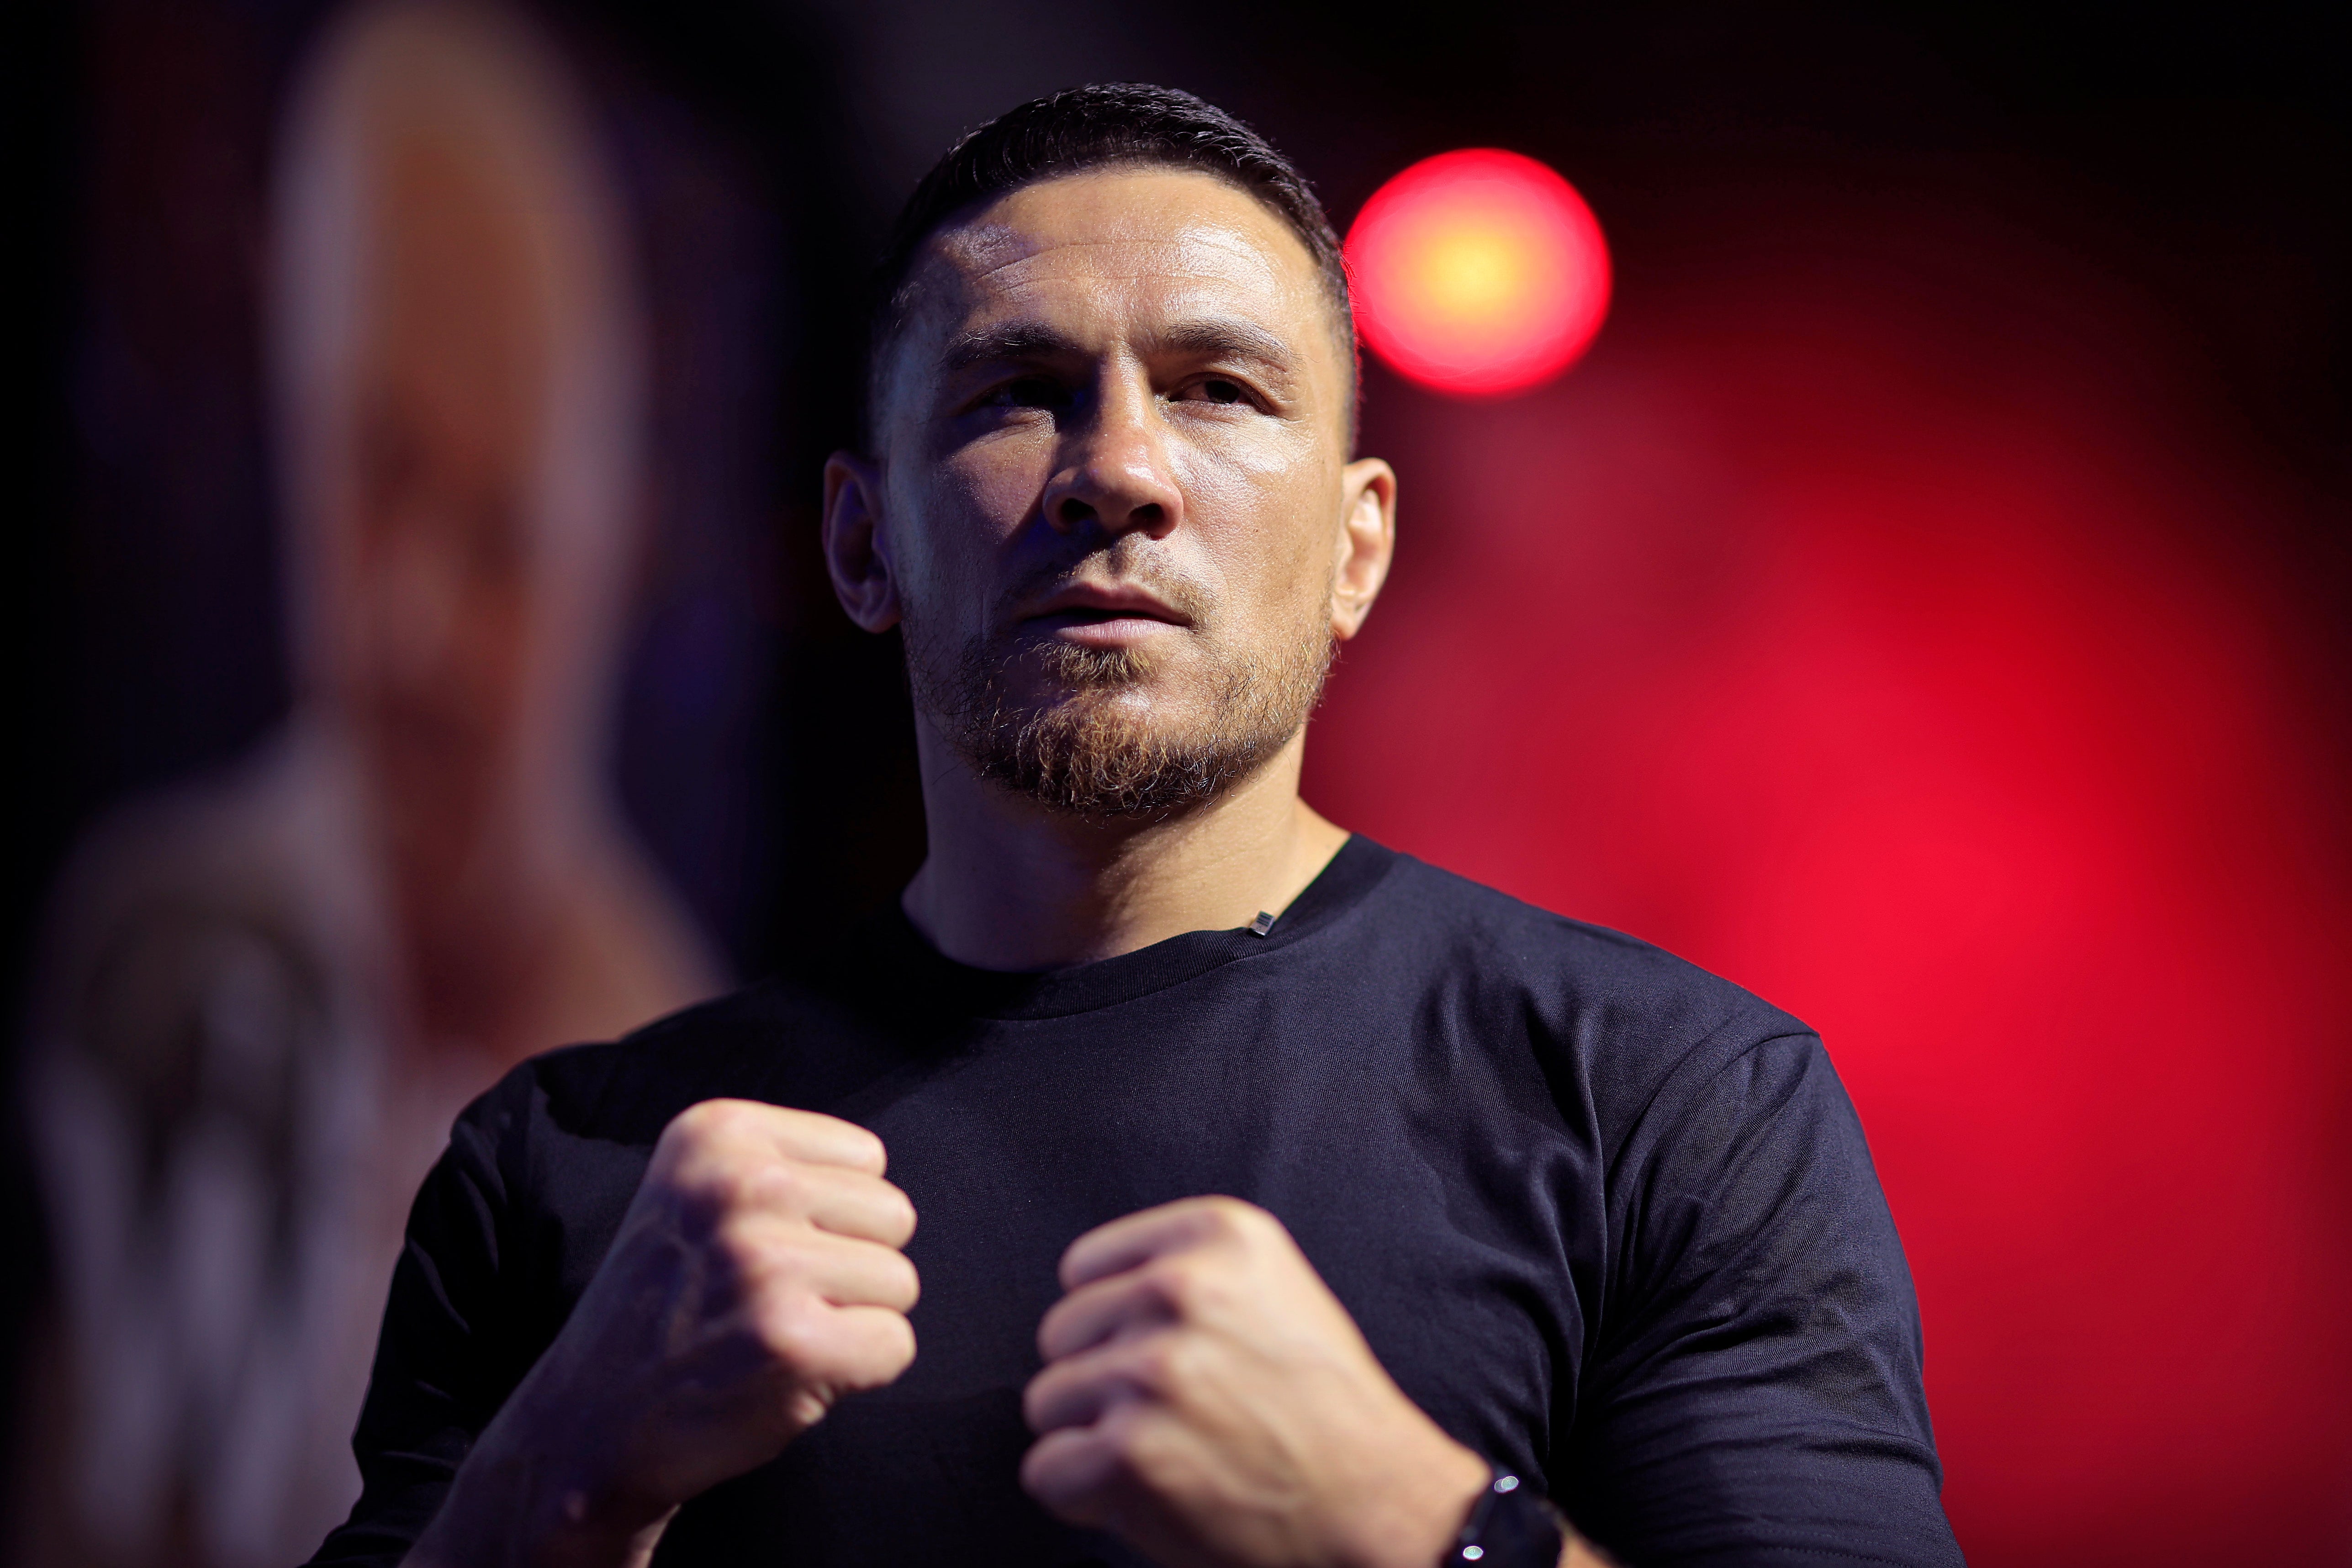 Sonny Bill Williams has been boxing since retiring from rugby